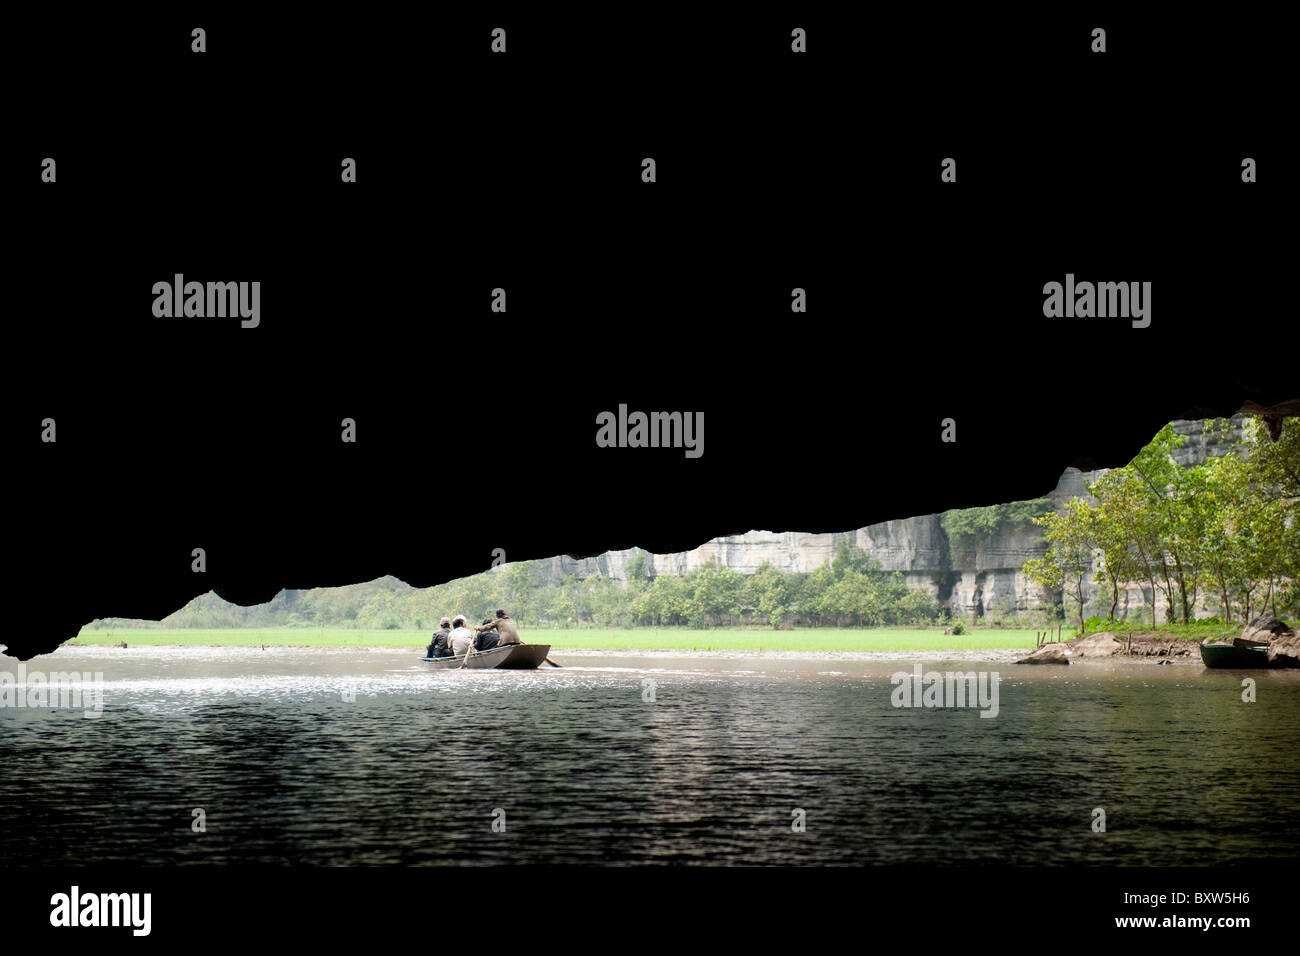 Boats passing a long cave passage on the river, Tam Coc, Ninh Binh, Vietnam Stock Photo